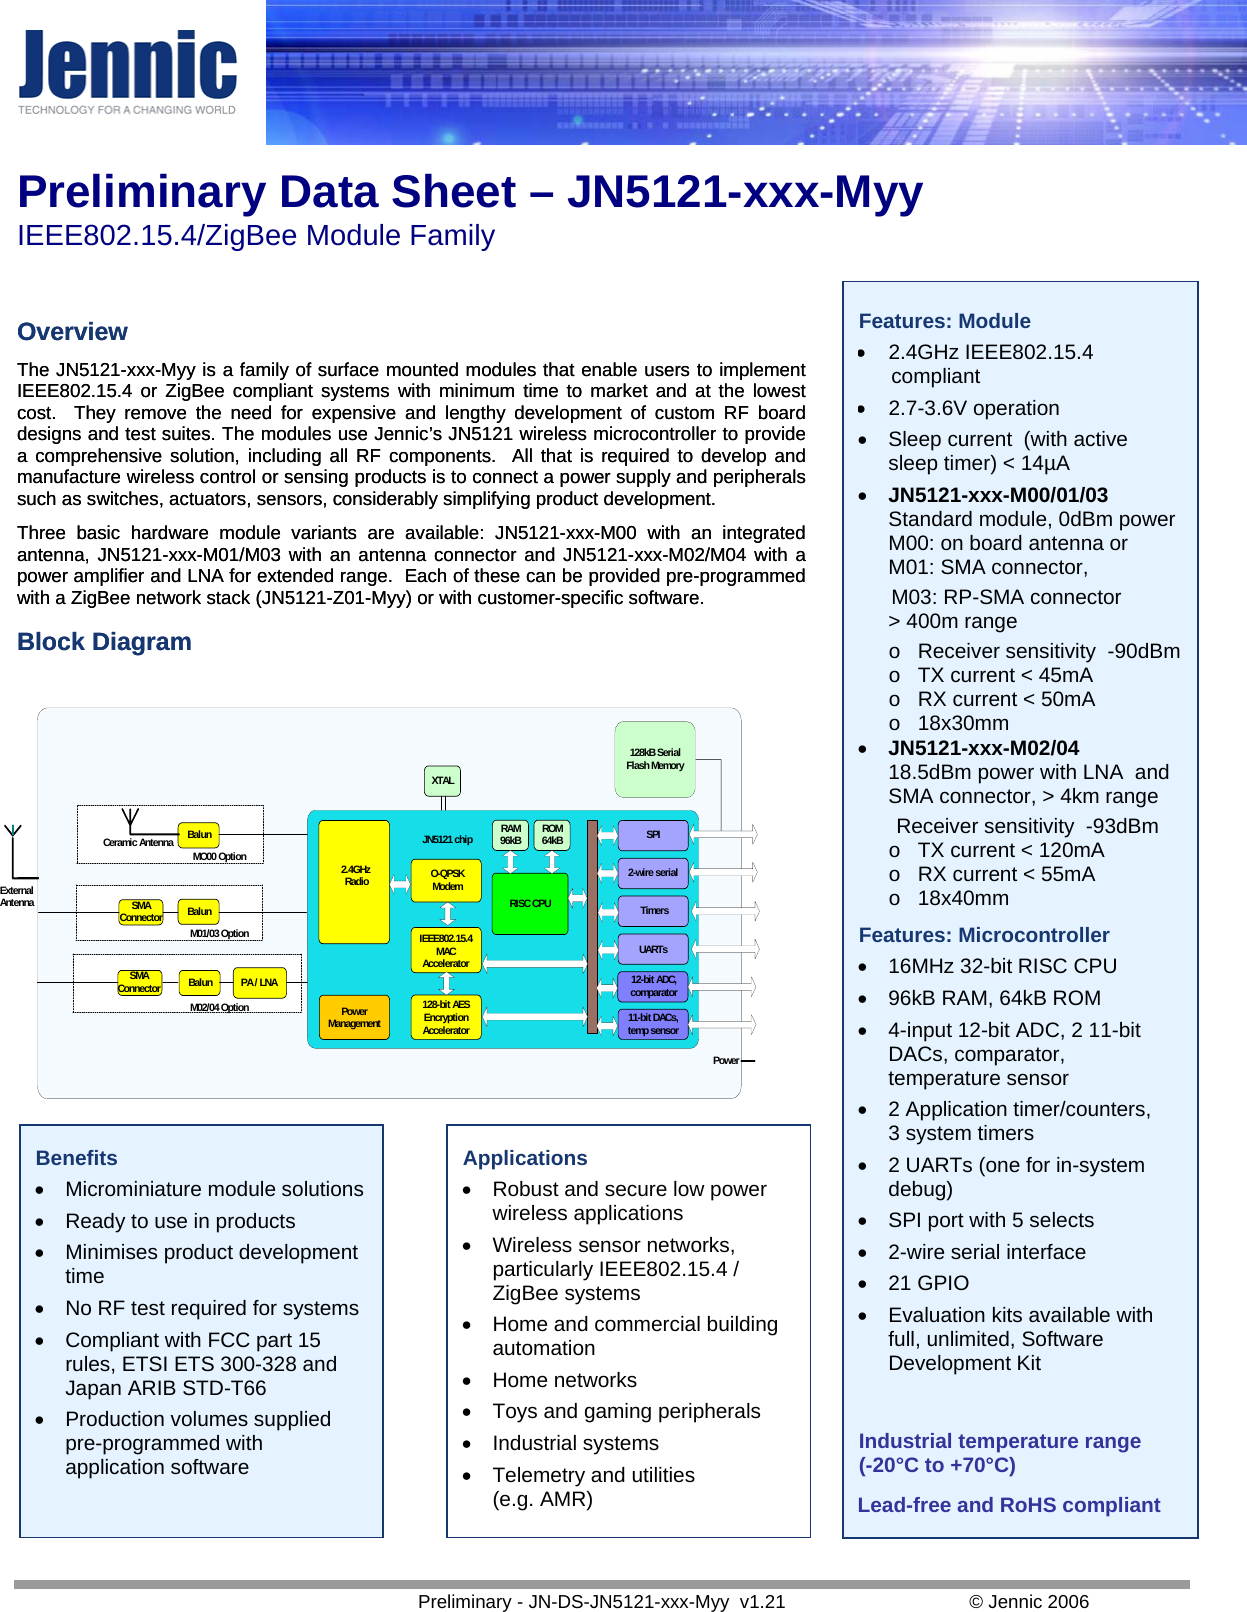 Preliminary Data Sheet – JN5121-xxx-Myy  IEEE802.15.4/ZigBee Module Family   Preliminary - JN-DS-JN5121-xxx-Myy  v1.21  © Jennic 2006   Features: Module • 2.4GHz IEEE802.15.4 compliant • 2.7-3.6V operation • Sleep current  (with active sleep timer) &lt; 14µA • JN5121-xxx-M00/01/03  Standard module, 0dBm power  M00: on board antenna or  M01: SMA connector, M03: RP-SMA connector   &gt; 400m range o  Receiver sensitivity  -90dBmo  TX current &lt; 45mA  o  RX current &lt; 50mA o  18x30mm • JN5121-xxx-M02/04   18.5dBm power with LNA  and SMA connector, &gt; 4km range  Receiver sensitivity  -93dBm o  TX current &lt; 120mA  o  RX current &lt; 55mA o  18x40mm Features: Microcontroller • 16MHz 32-bit RISC CPU • 96kB RAM, 64kB ROM • 4-input 12-bit ADC, 2 11-bit DACs, comparator, temperature sensor • 2 Application timer/counters,  3 system timers • 2 UARTs (one for in-system debug) • SPI port with 5 selects • 2-wire serial interface • 21 GPIO • Evaluation kits available with full, unlimited, Software Development Kit      Industrial temperature range (-20°C to +70°C)  Lead-free and RoHS compliant Overview Overview The JN5121-xxx-Myy is a family of surface mounted modules that enable users to implement IEEE802.15.4 or ZigBee compliant systems with minimum time to market and at the lowest cost.  They remove the need for expensive and lengthy development of custom RF board designs and test suites. The modules use Jennic’s JN5121 wireless microcontroller to provide a comprehensive solution, including all RF components.  All that is required to develop and manufacture wireless control or sensing products is to connect a power supply and peripherals such as switches, actuators, sensors, considerably simplifying product development. The JN5121-xxx-Myy is a family of surface mounted modules that enable users to implement IEEE802.15.4 or ZigBee compliant systems with minimum time to market and at the lowest cost.  They remove the need for expensive and lengthy development of custom RF board designs and test suites. The modules use Jennic’s JN5121 wireless microcontroller to provide a comprehensive solution, including all RF components.  All that is required to develop and manufacture wireless control or sensing products is to connect a power supply and peripherals such as switches, actuators, sensors, considerably simplifying product development. Three basic hardware module variants are available: JN5121-xxx-M00 with an integrated antenna, JN5121-xxx-M01/M03 with an antenna connector and JN5121-xxx-M02/M04 with a power amplifier and LNA for extended range.  Each of these can be provided pre-programmed with a ZigBee network stack (JN5121-Z01-Myy) or with customer-specific software. Three basic hardware module variants are available: JN5121-xxx-M00 with an integrated antenna, JN5121-xxx-M01/M03 with an antenna connector and JN5121-xxx-M02/M04 with a power amplifier and LNA for extended range.  Each of these can be provided pre-programmed with a ZigBee network stack (JN5121-Z01-Myy) or with customer-specific software. Block Diagram Block Diagram                     TimersUARTs12-bit ADC,comparator11-bit DACs,temp sensor2-wire serialSPIRAM96kB128-bit AESEncryptionAccelerator2.4GHz RadioROM64kBRISC CPUPowerManagementXTALO-QPSKModemIEEE802.15.4MACAccelerator128kB SerialFlash MemoryJN5121 chipPowerBalunSMAConnectorBalunCeramic AntennaBalunSMAConnector PA / LNAExternalAntennaMO00 OptionM01/03 OptionM02/04 Option      Benefits • Microminiature module solutions • Ready to use in products • Minimises product development time • No RF test required for systems • Compliant with FCC part 15 rules, ETSI ETS 300-328 and Japan ARIB STD-T66 • Production volumes supplied pre-programmed with application software Applications • Robust and secure low power wireless applications • Wireless sensor networks, particularly IEEE802.15.4 / ZigBee systems • Home and commercial building automation • Home networks • Toys and gaming peripherals • Industrial systems • Telemetry and utilities (e.g. AMR) 